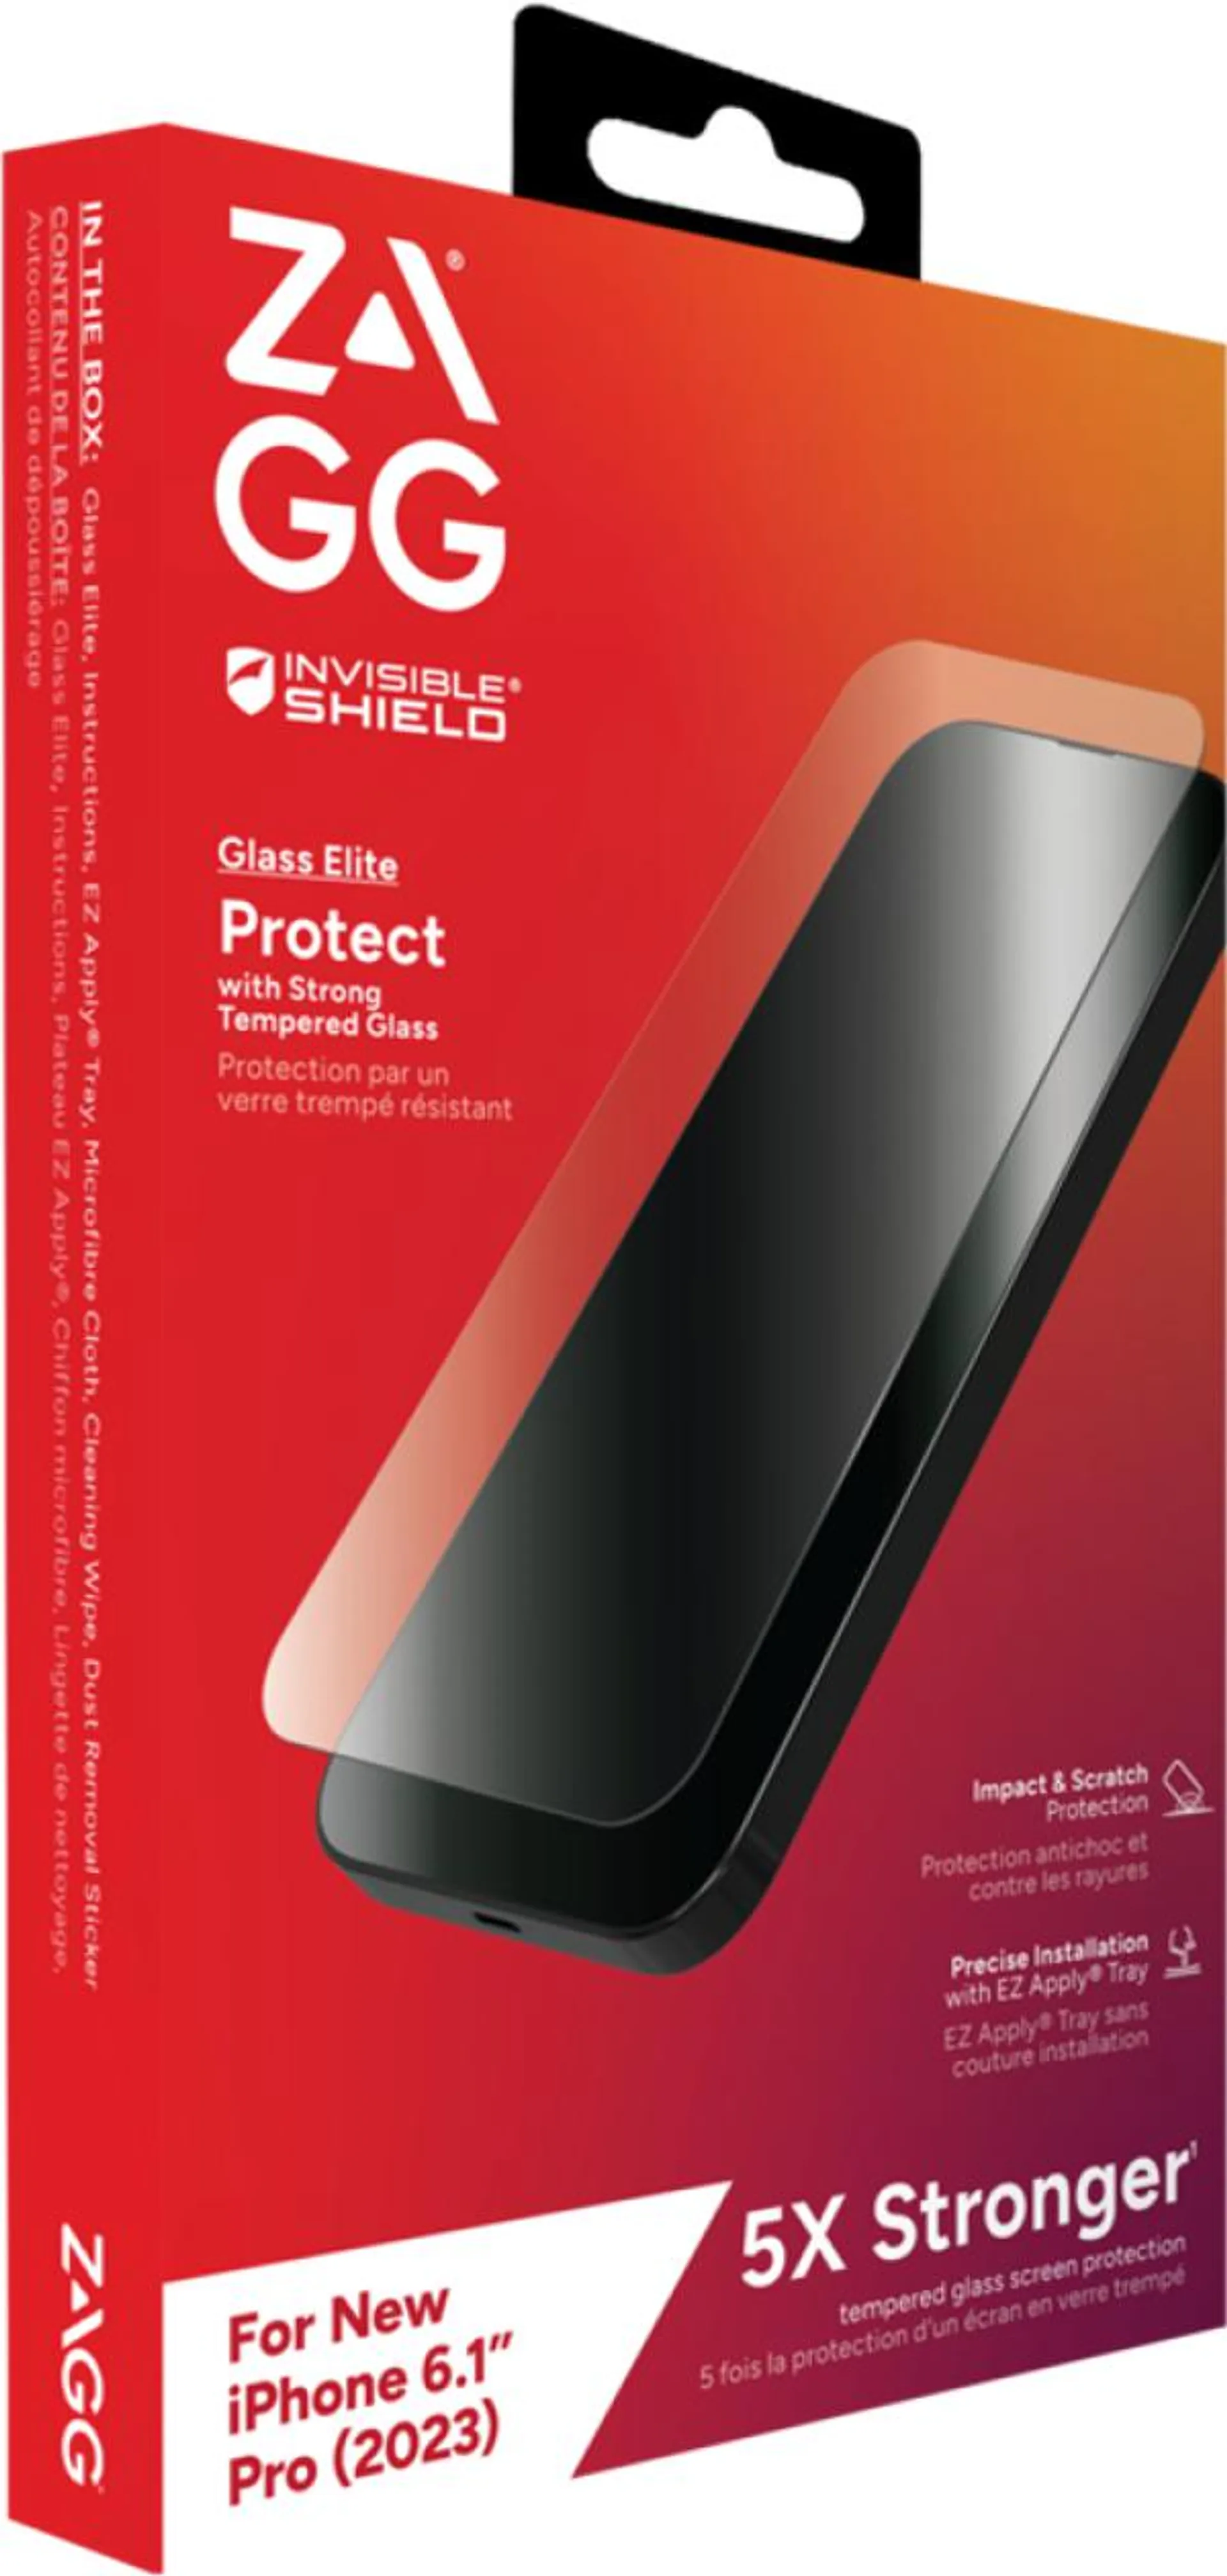 InvisibleShield Glass Elite Screen Protector for iPhone 15 Pro